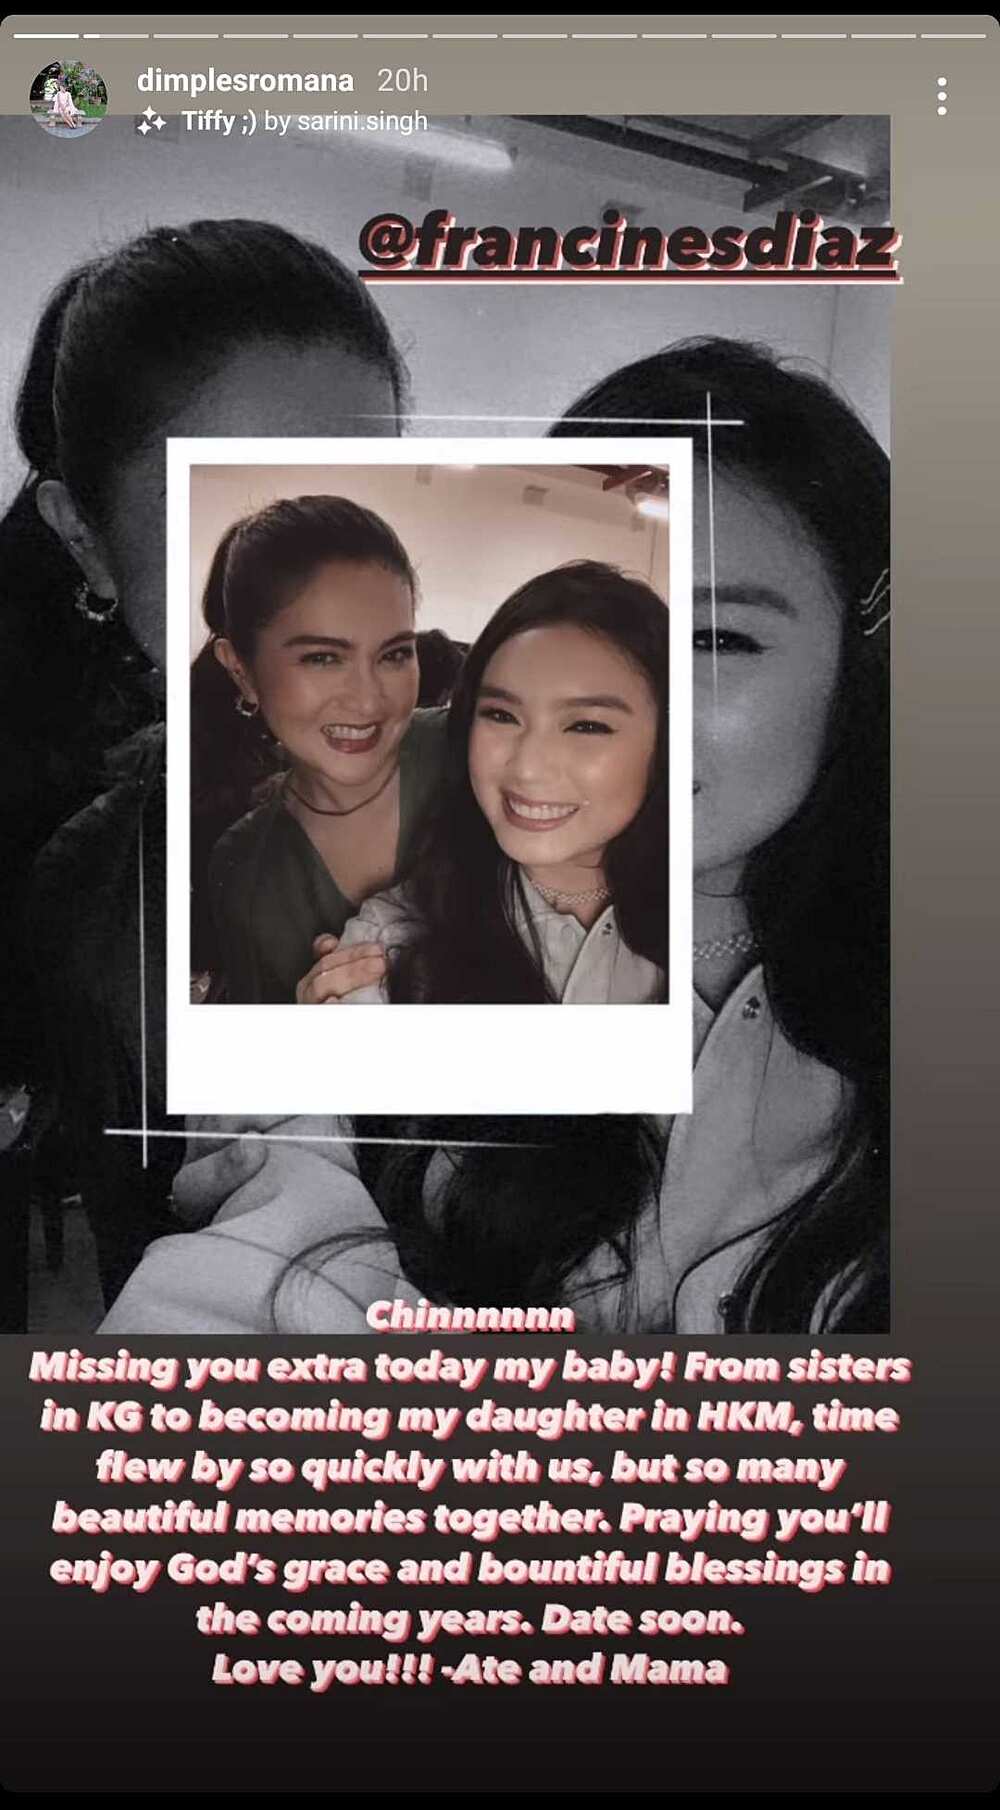 Dimples Romana pens sweet and heartwarming birthday note for Francine Diaz